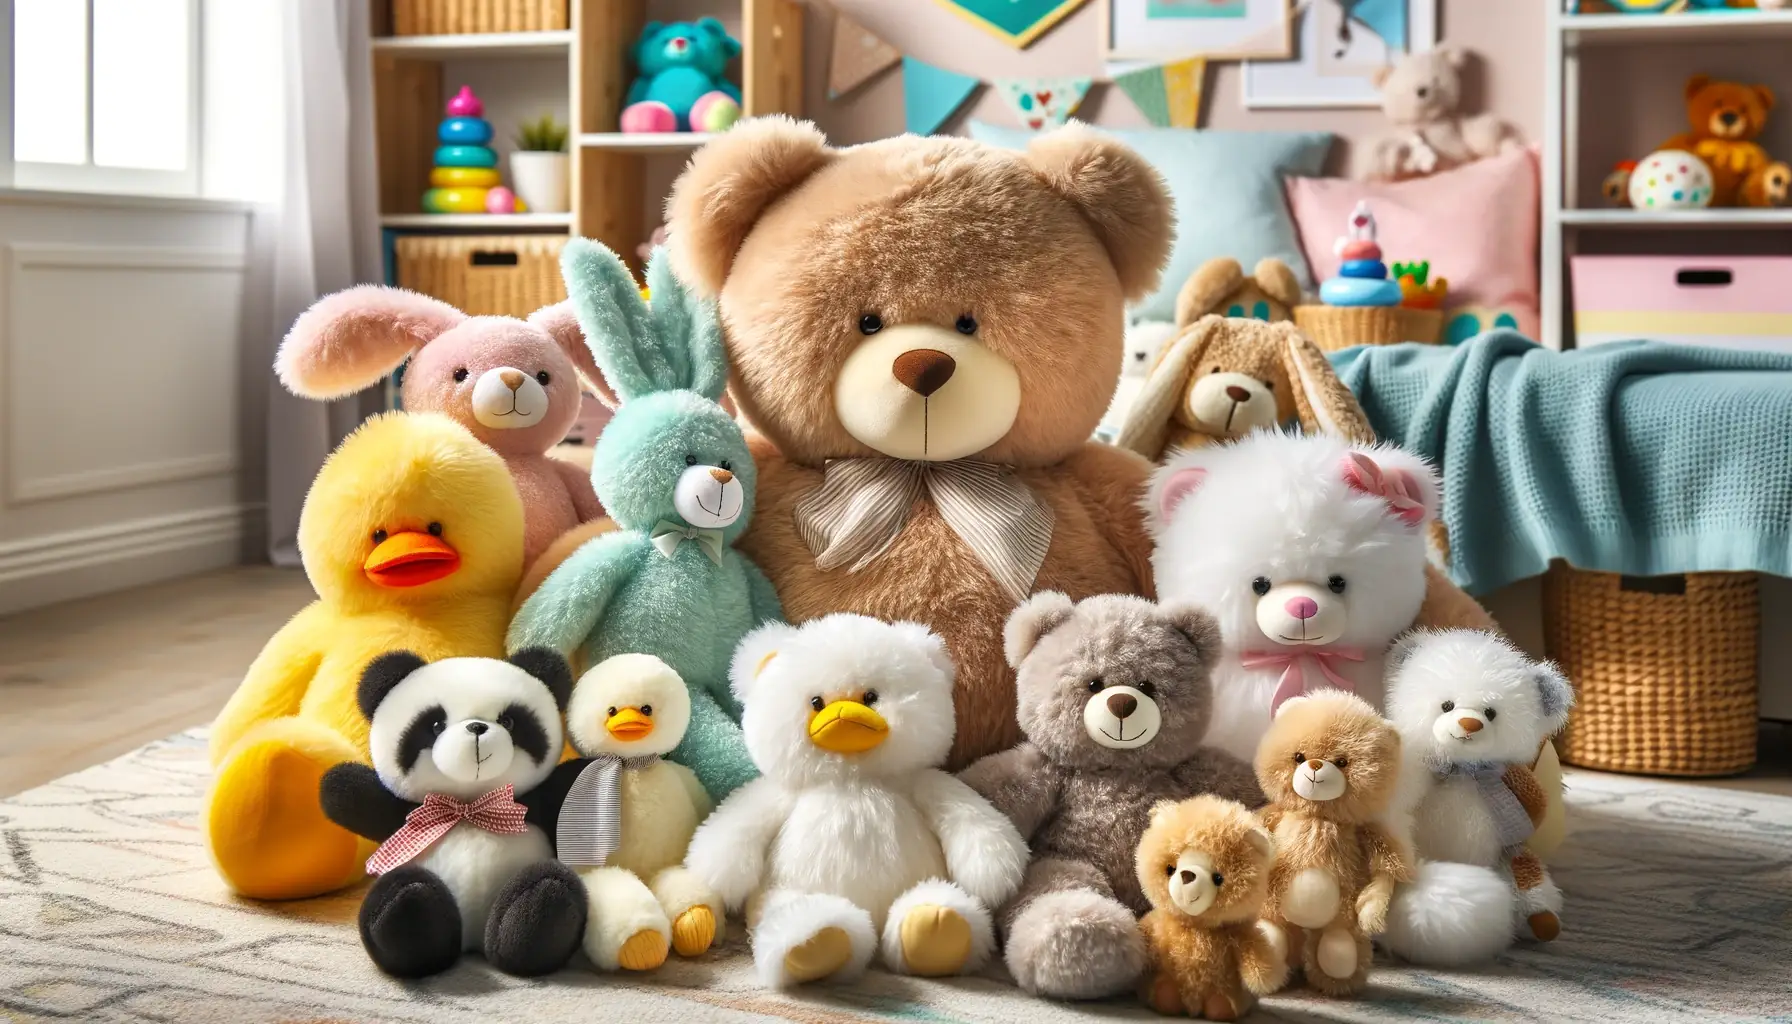 A collection of fluffy stuffed animals, including a teddy bear, bunny, duck, and panda, displayed in a child's playroom with vibrant colors and playful decor, emphasizing their plush textures and inviting appearances.